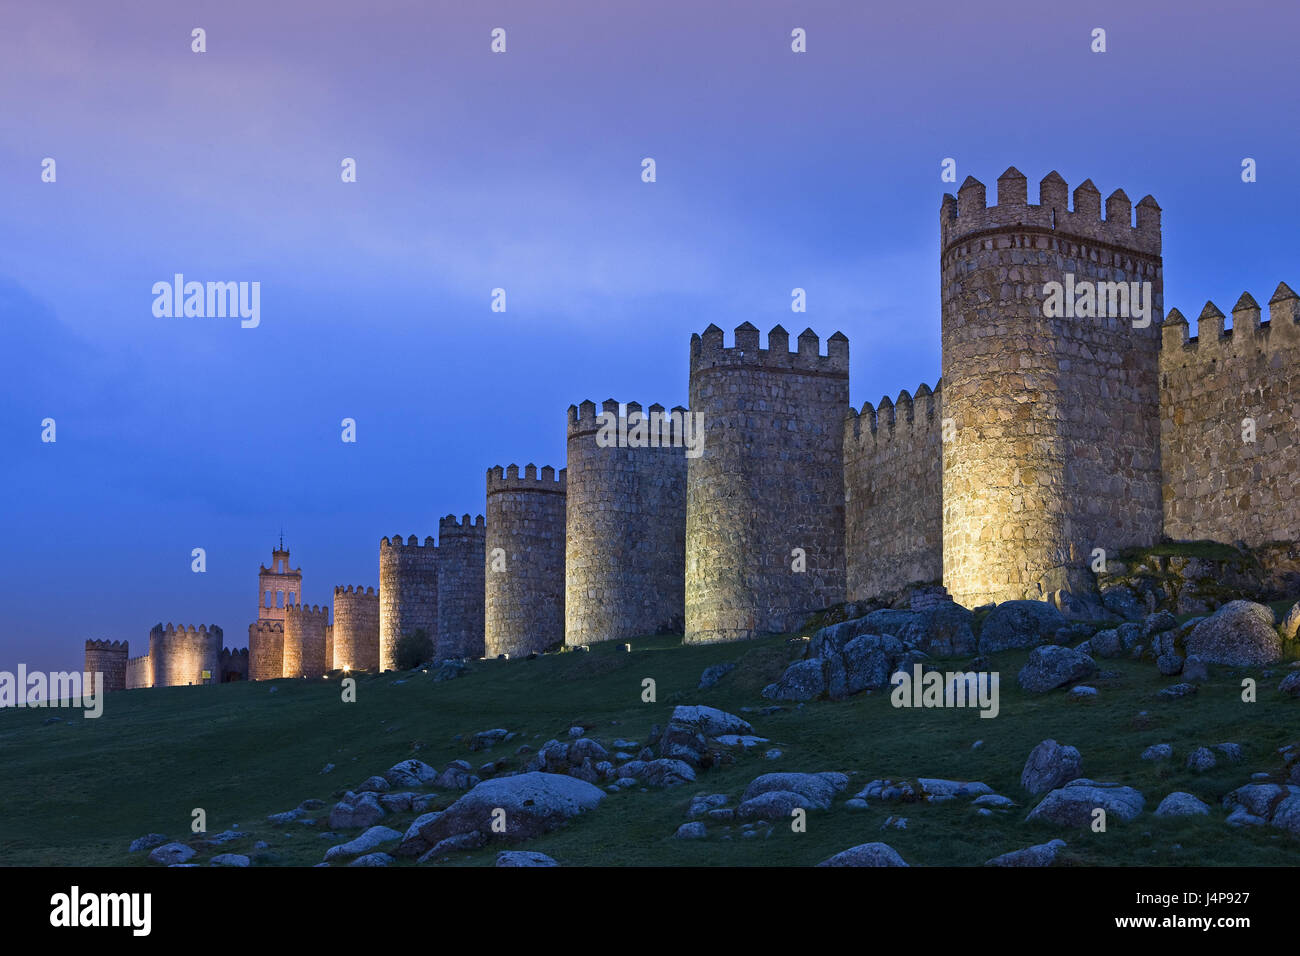 Spain, Castile, Avila, city wall, towers, Kastilien-Leon, structure, building, castle, watch-towers, fortification, fortress, outside, tourism, place of interest, evening, dusk, nobody, Stock Photo